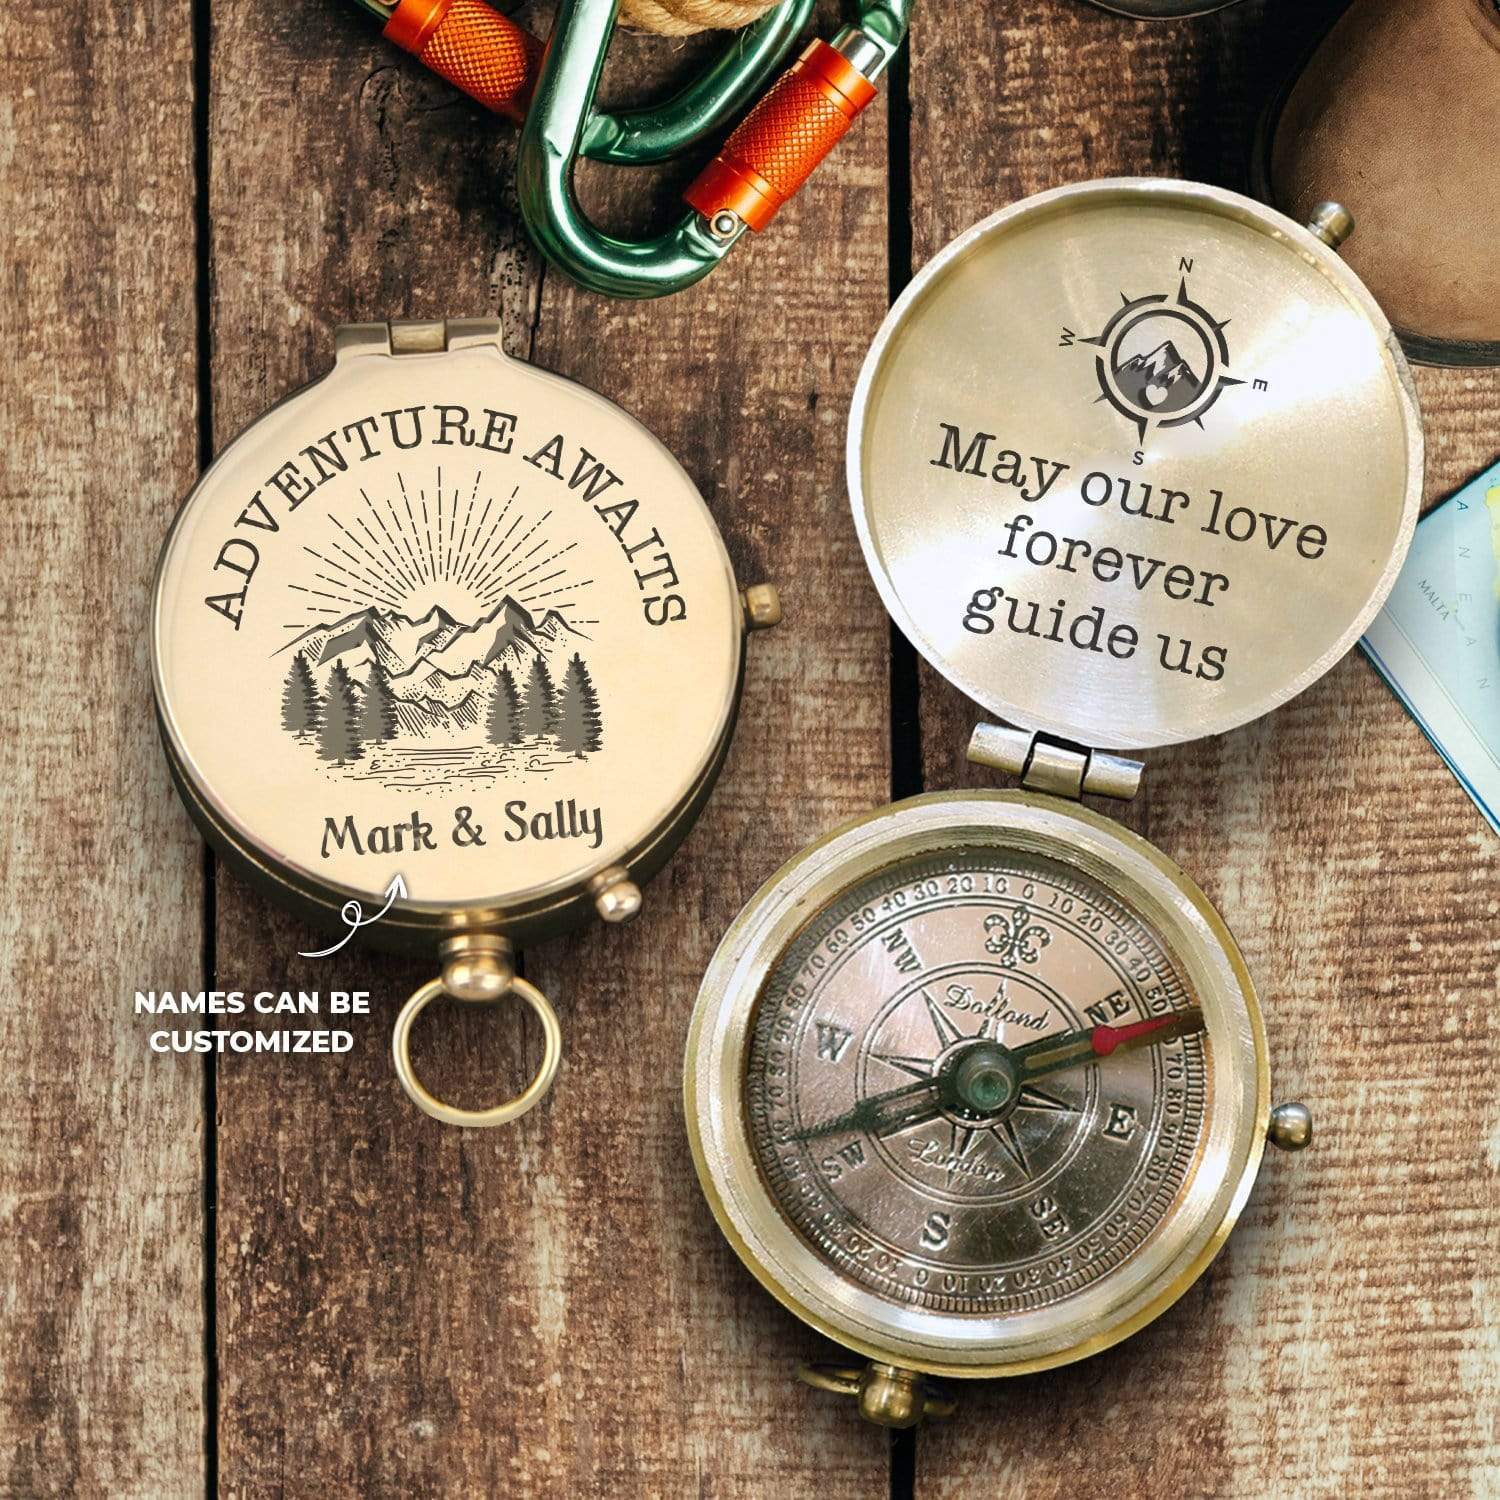 Personalized Engraved Compass - Travel - To My Future Husband/ Future Wife - Adventure Awaits - Gpb24001